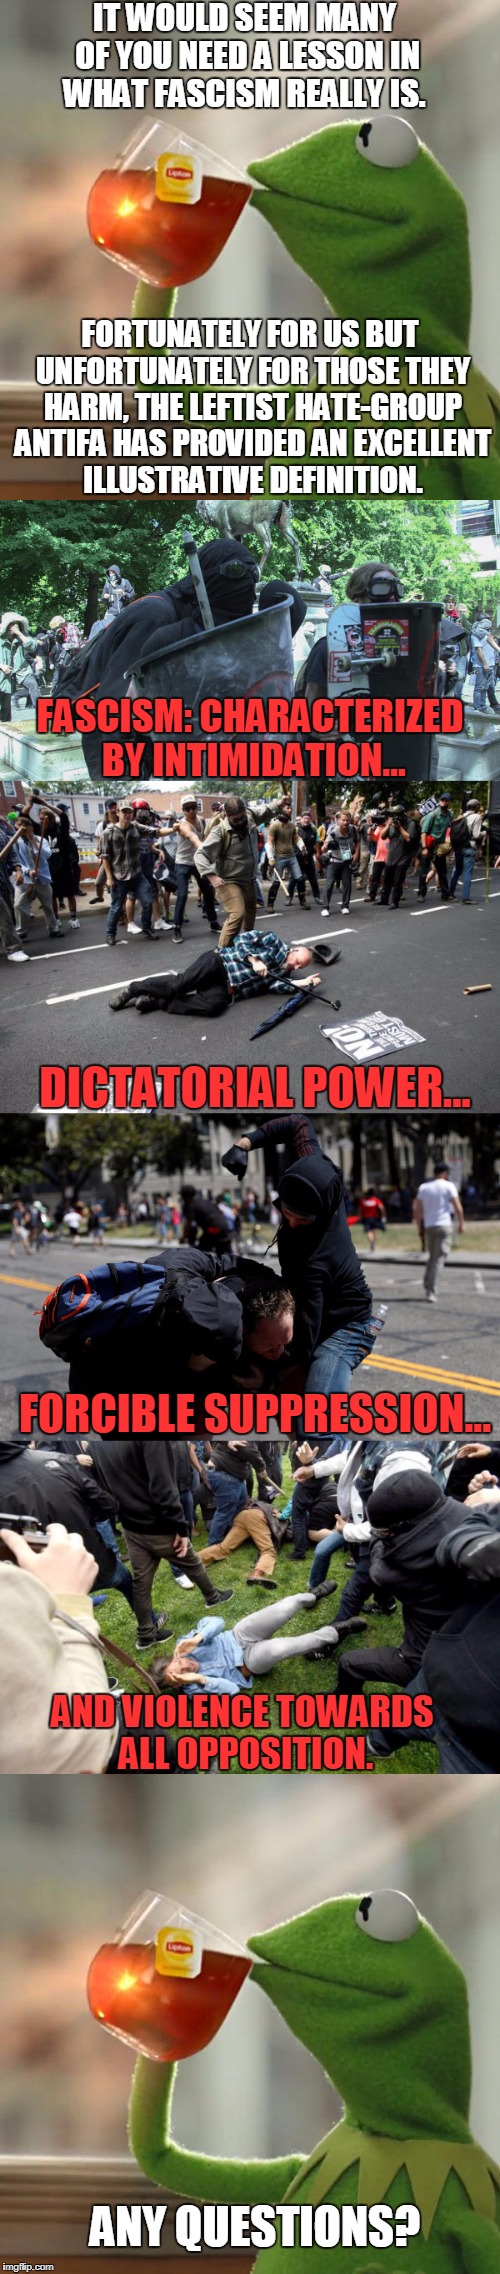 Antifa: Simply A National Socialist Workers' Party By Another Name | IT WOULD SEEM MANY OF YOU NEED A LESSON IN WHAT FASCISM REALLY IS. FORTUNATELY FOR US BUT UNFORTUNATELY FOR THOSE THEY HARM, THE LEFTIST HATE-GROUP ANTIFA HAS PROVIDED AN EXCELLENT ILLUSTRATIVE DEFINITION. FASCISM: CHARACTERIZED BY INTIMIDATION... DICTATORIAL POWER... FORCIBLE SUPPRESSION... AND VIOLENCE TOWARDS ALL OPPOSITION. ANY QUESTIONS? | image tagged in memes,but thats none of my business,antifa,leftists,hate | made w/ Imgflip meme maker